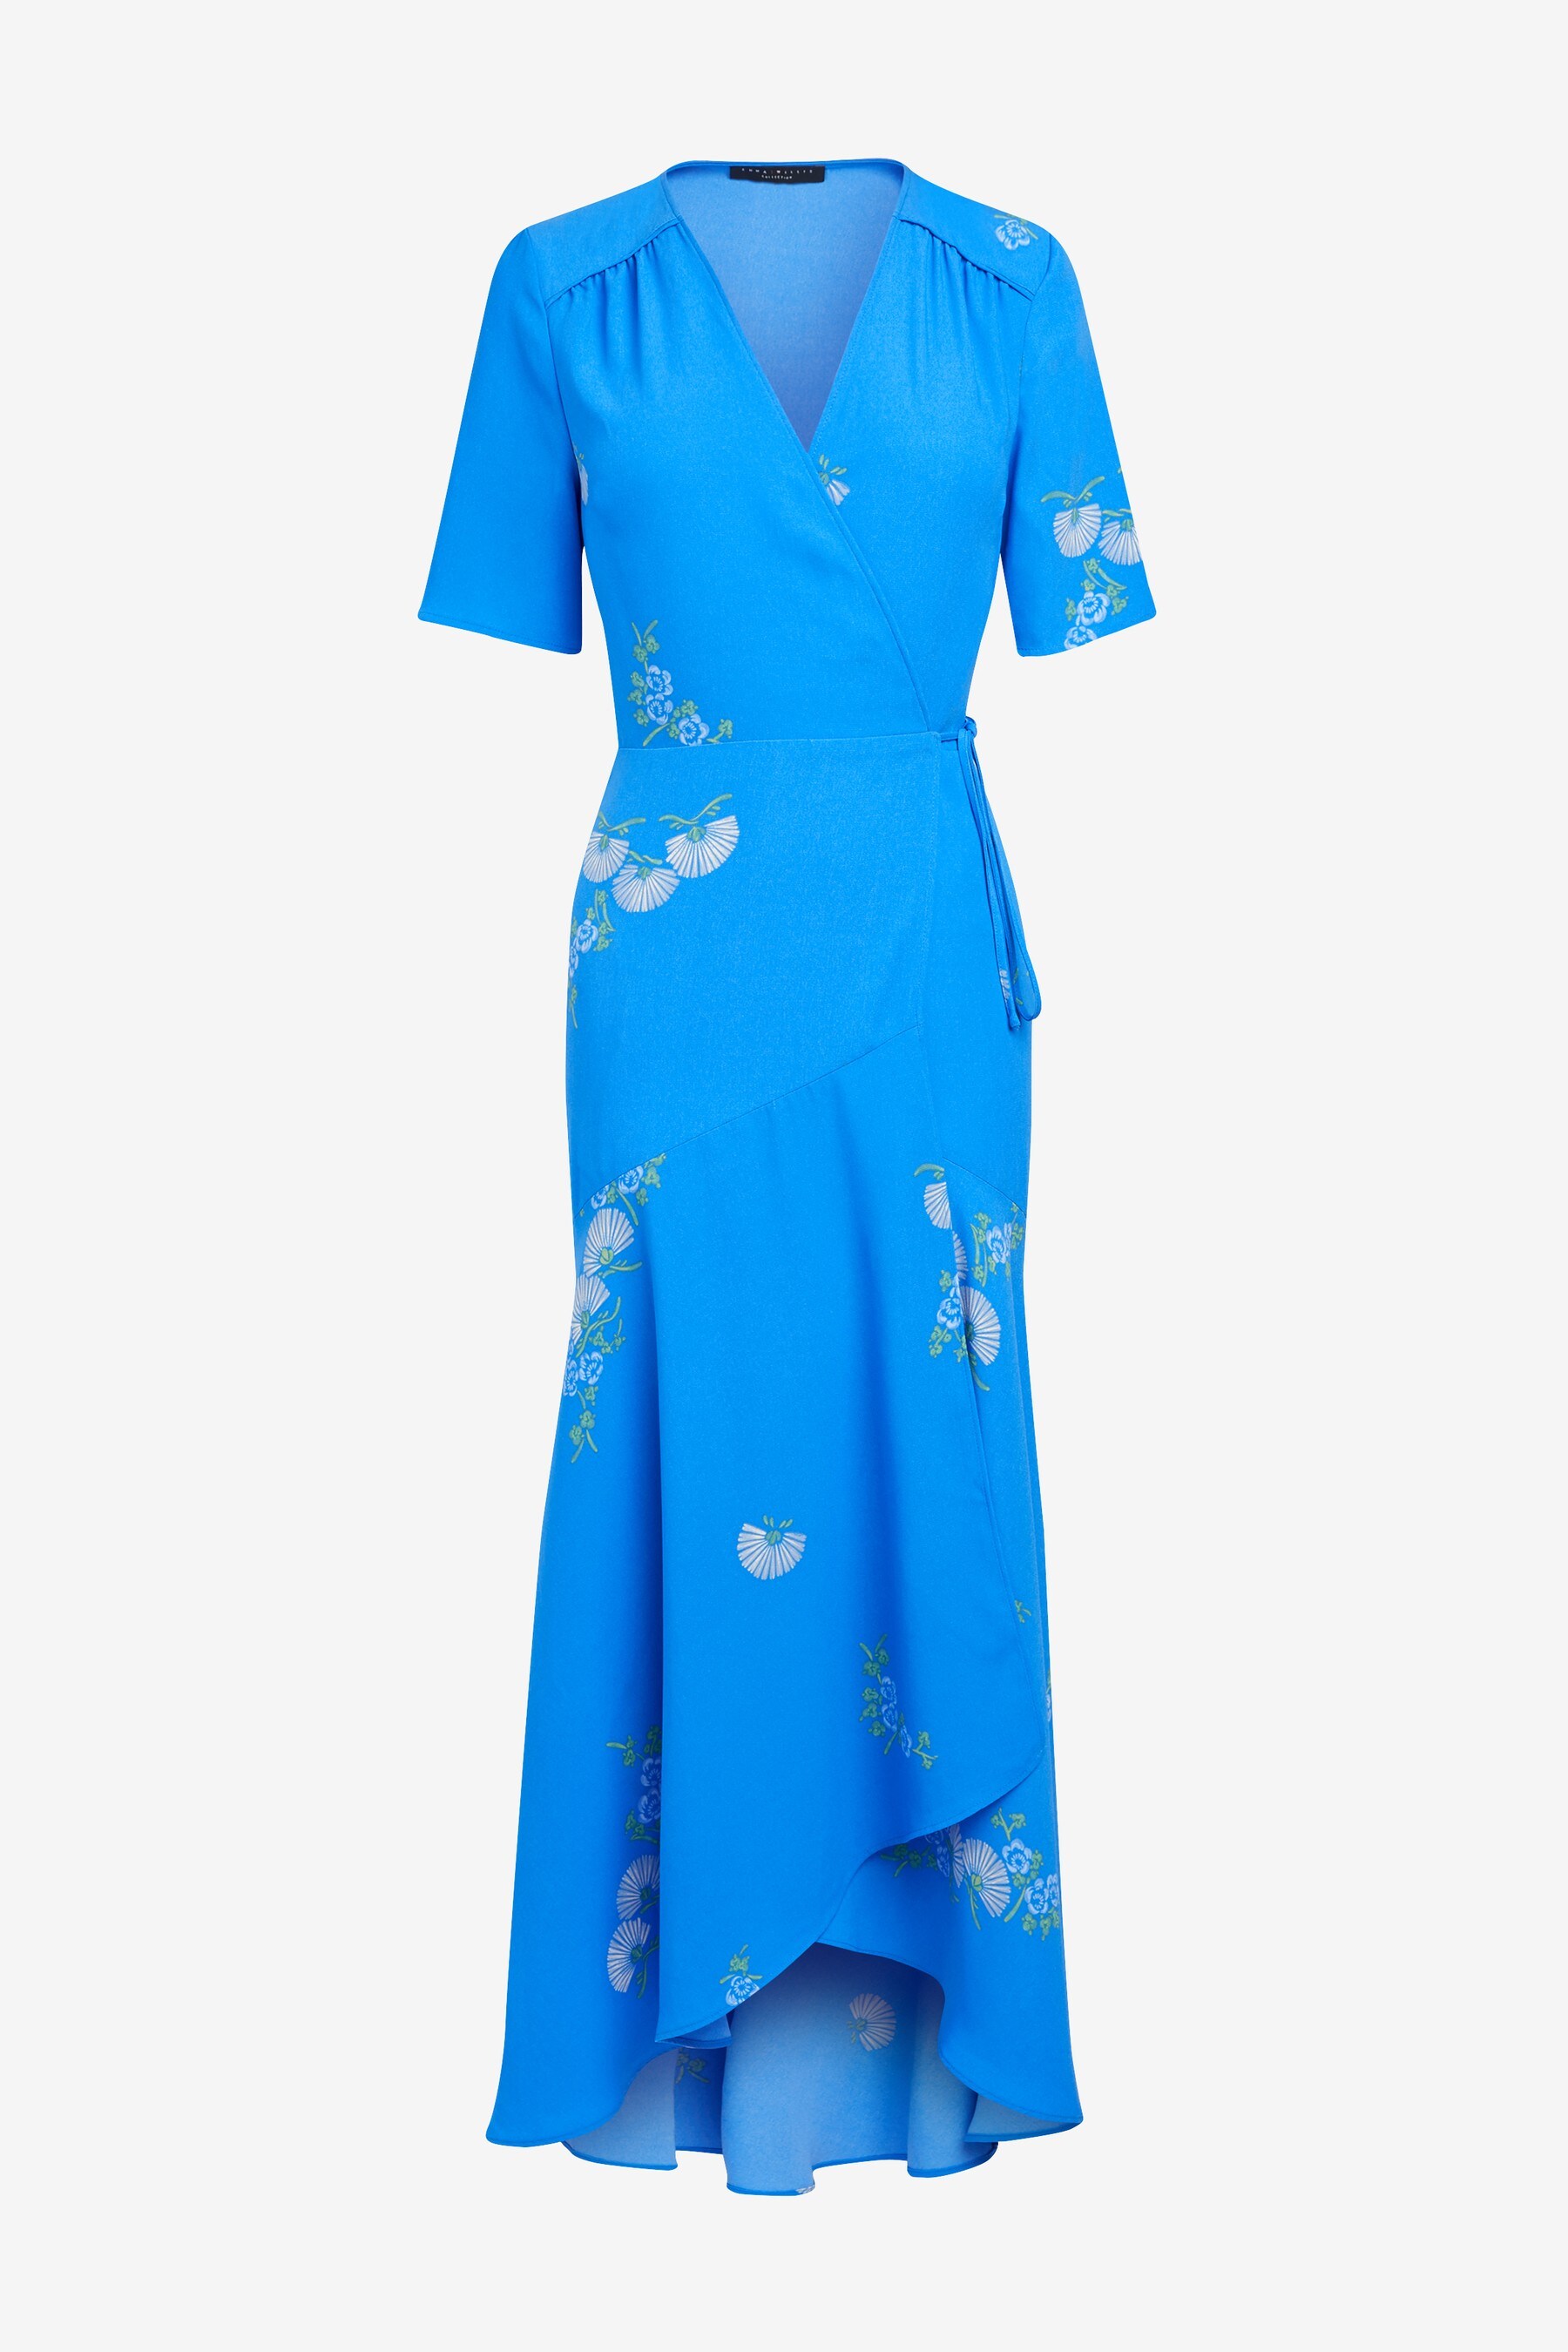 Buy Blue Emma Willis Printed Wrap Dress from the Next UK online shop